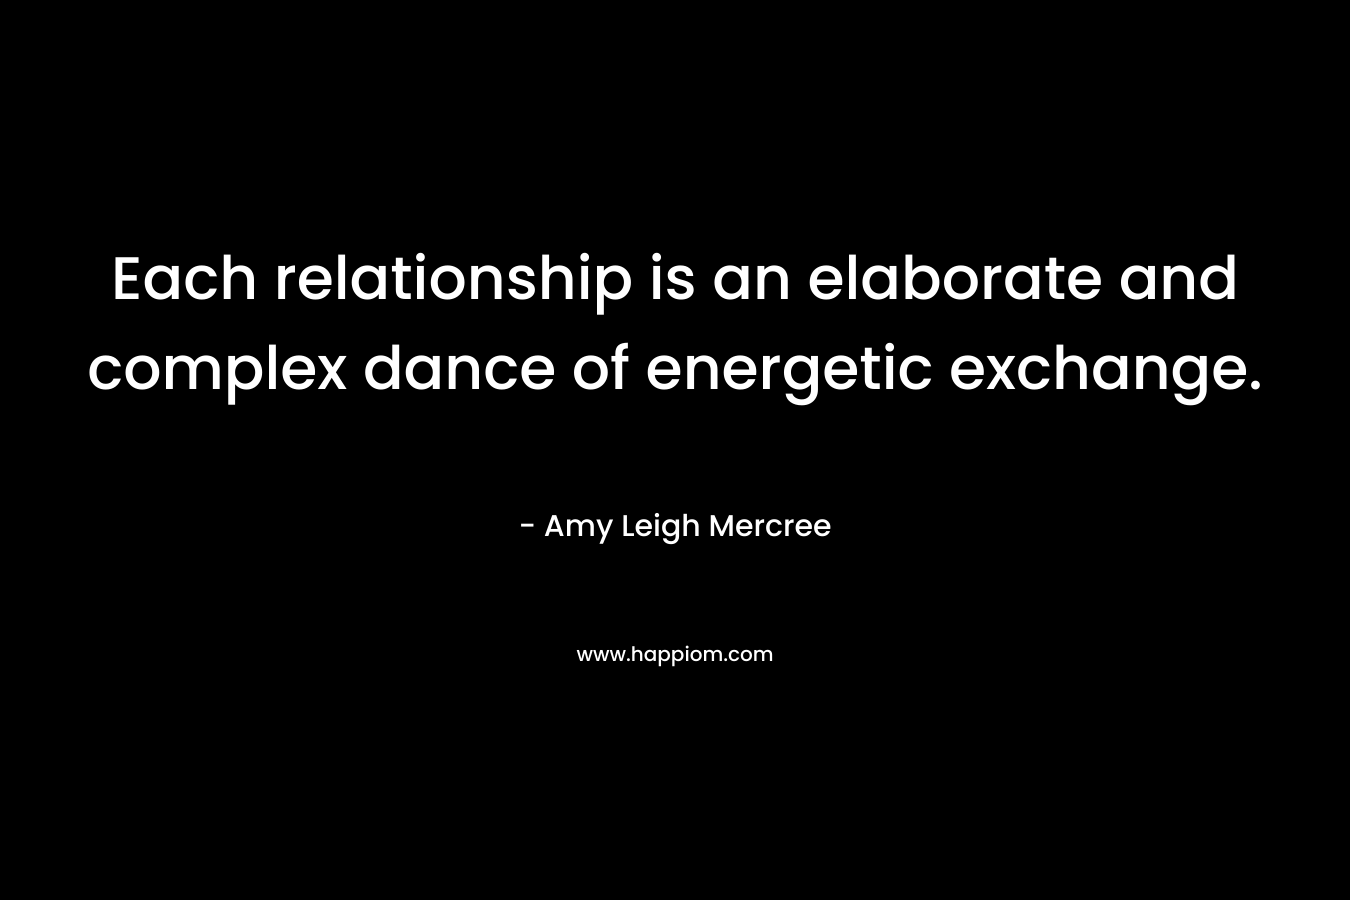 Each relationship is an elaborate and complex dance of energetic exchange. – Amy Leigh Mercree